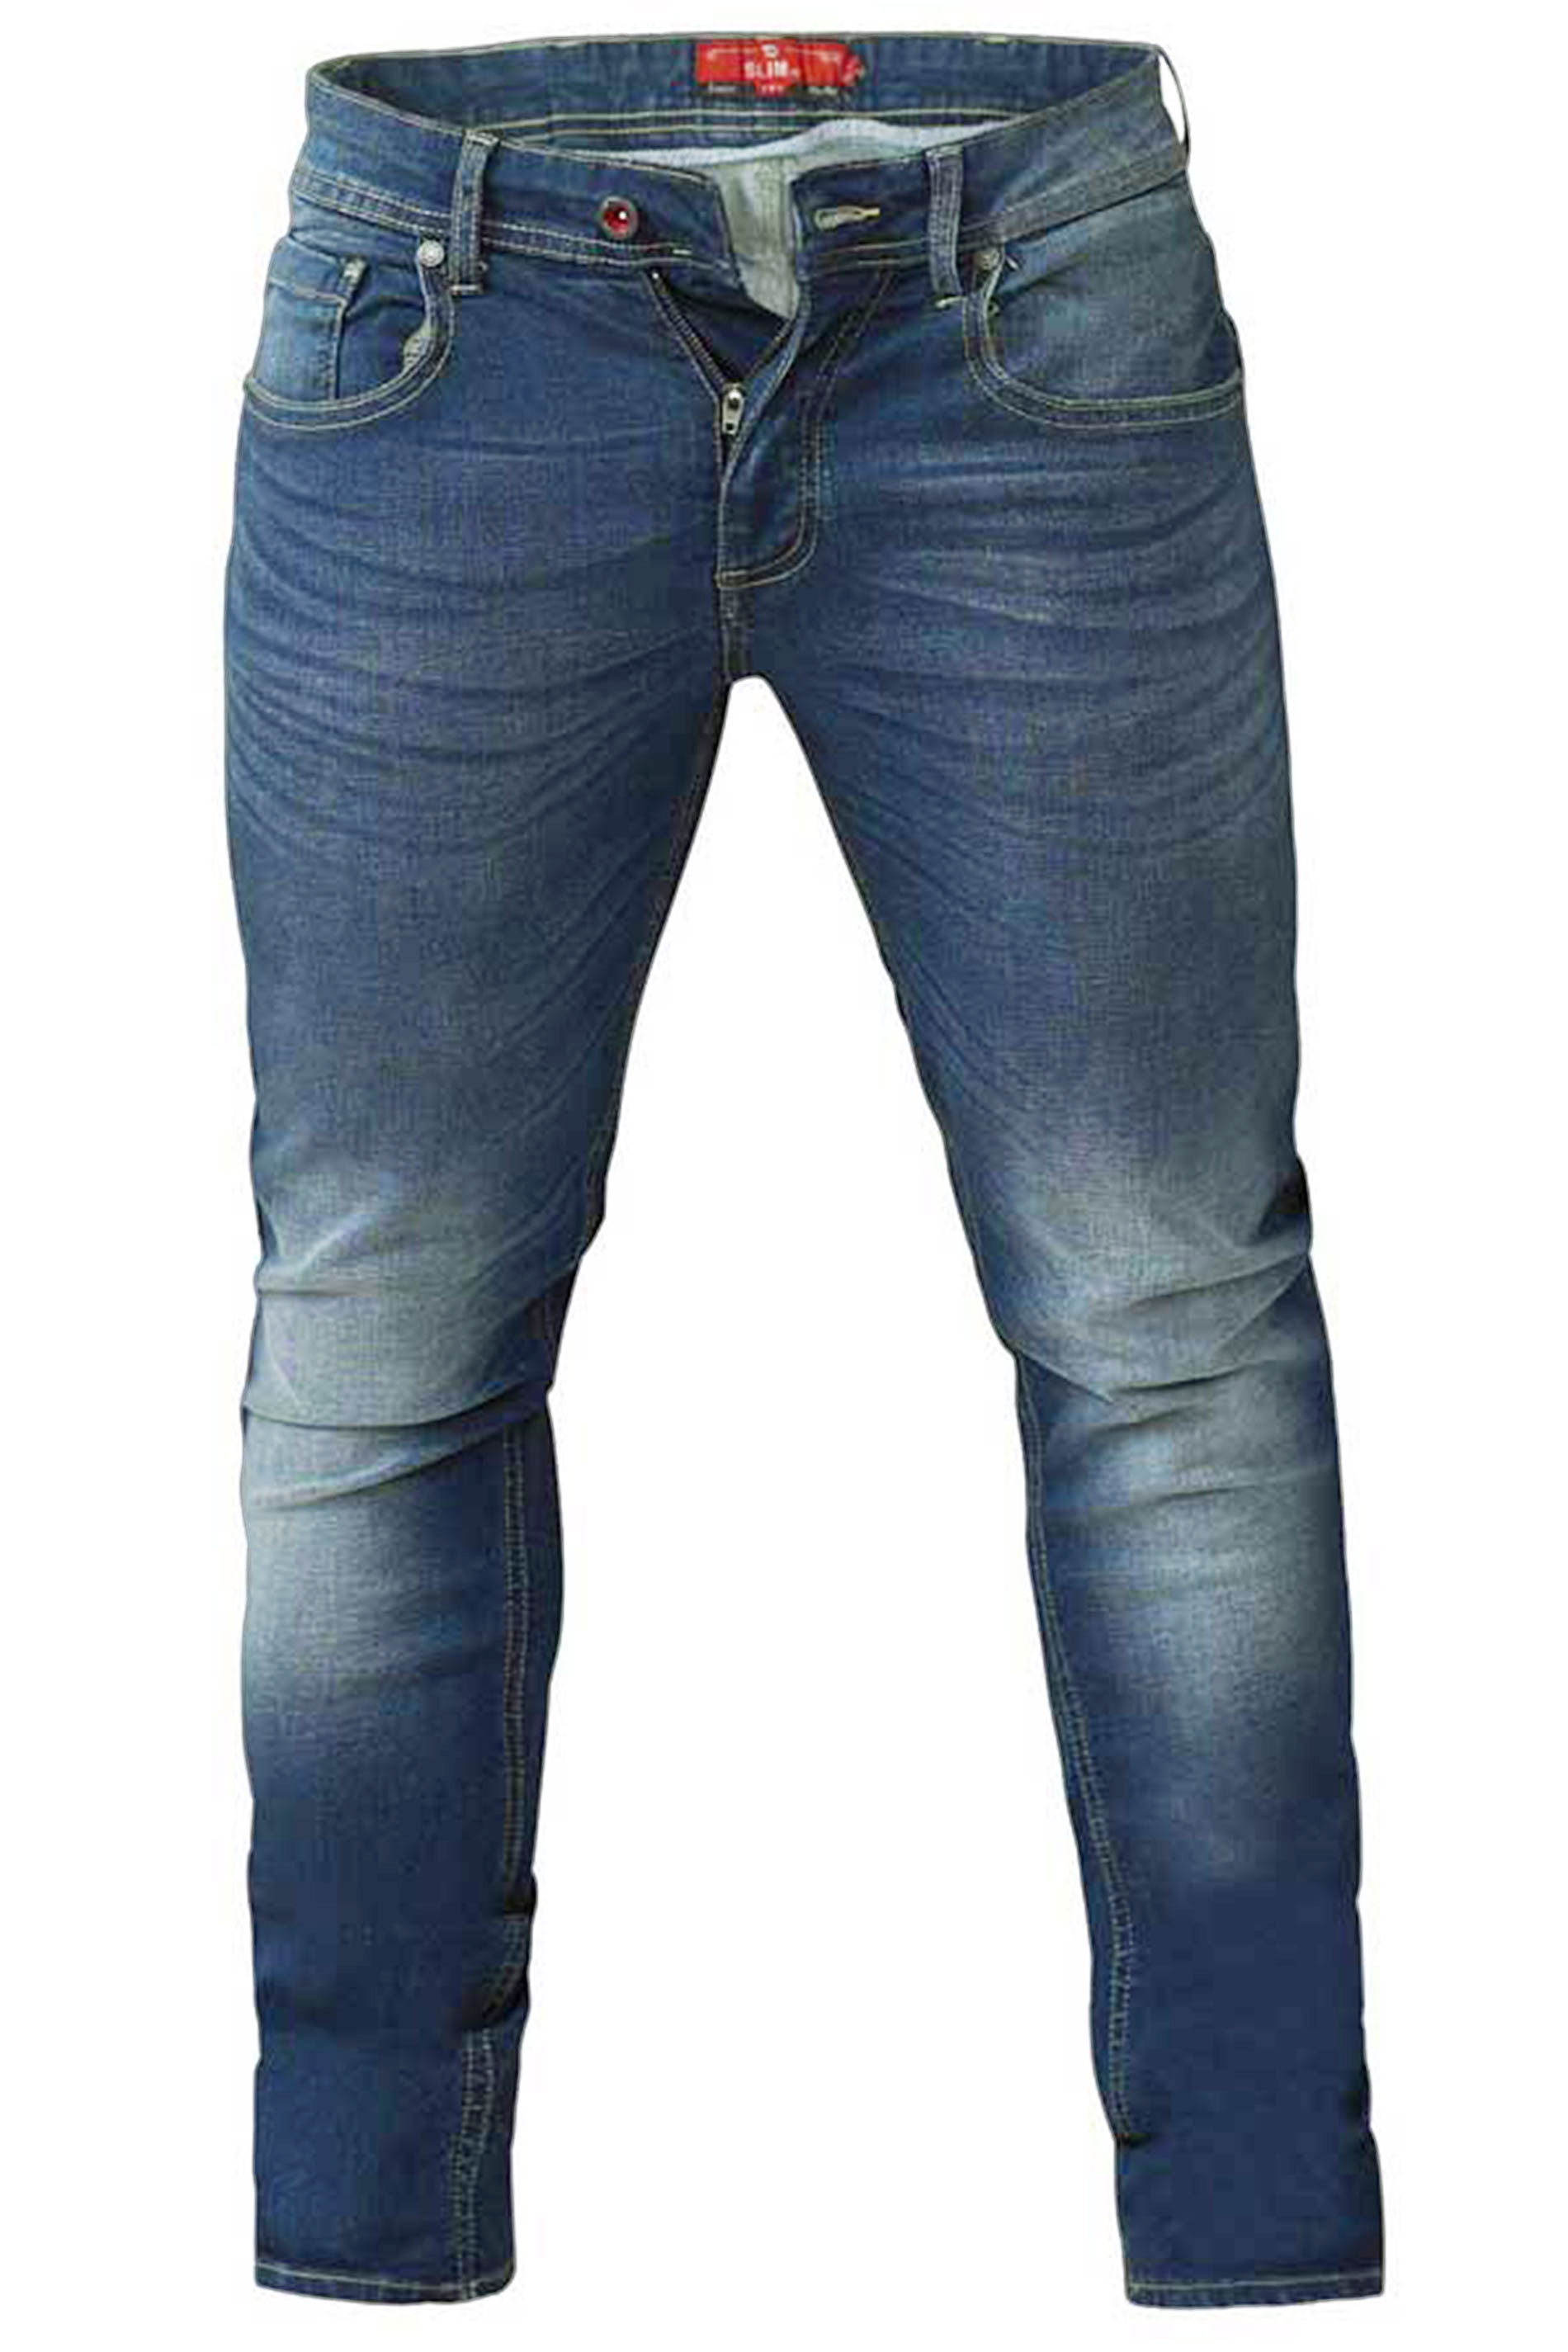 D555 Gent Tapered Fit Jeans Blue BIG Waist 40-72 inch Leg 27-34 inch 